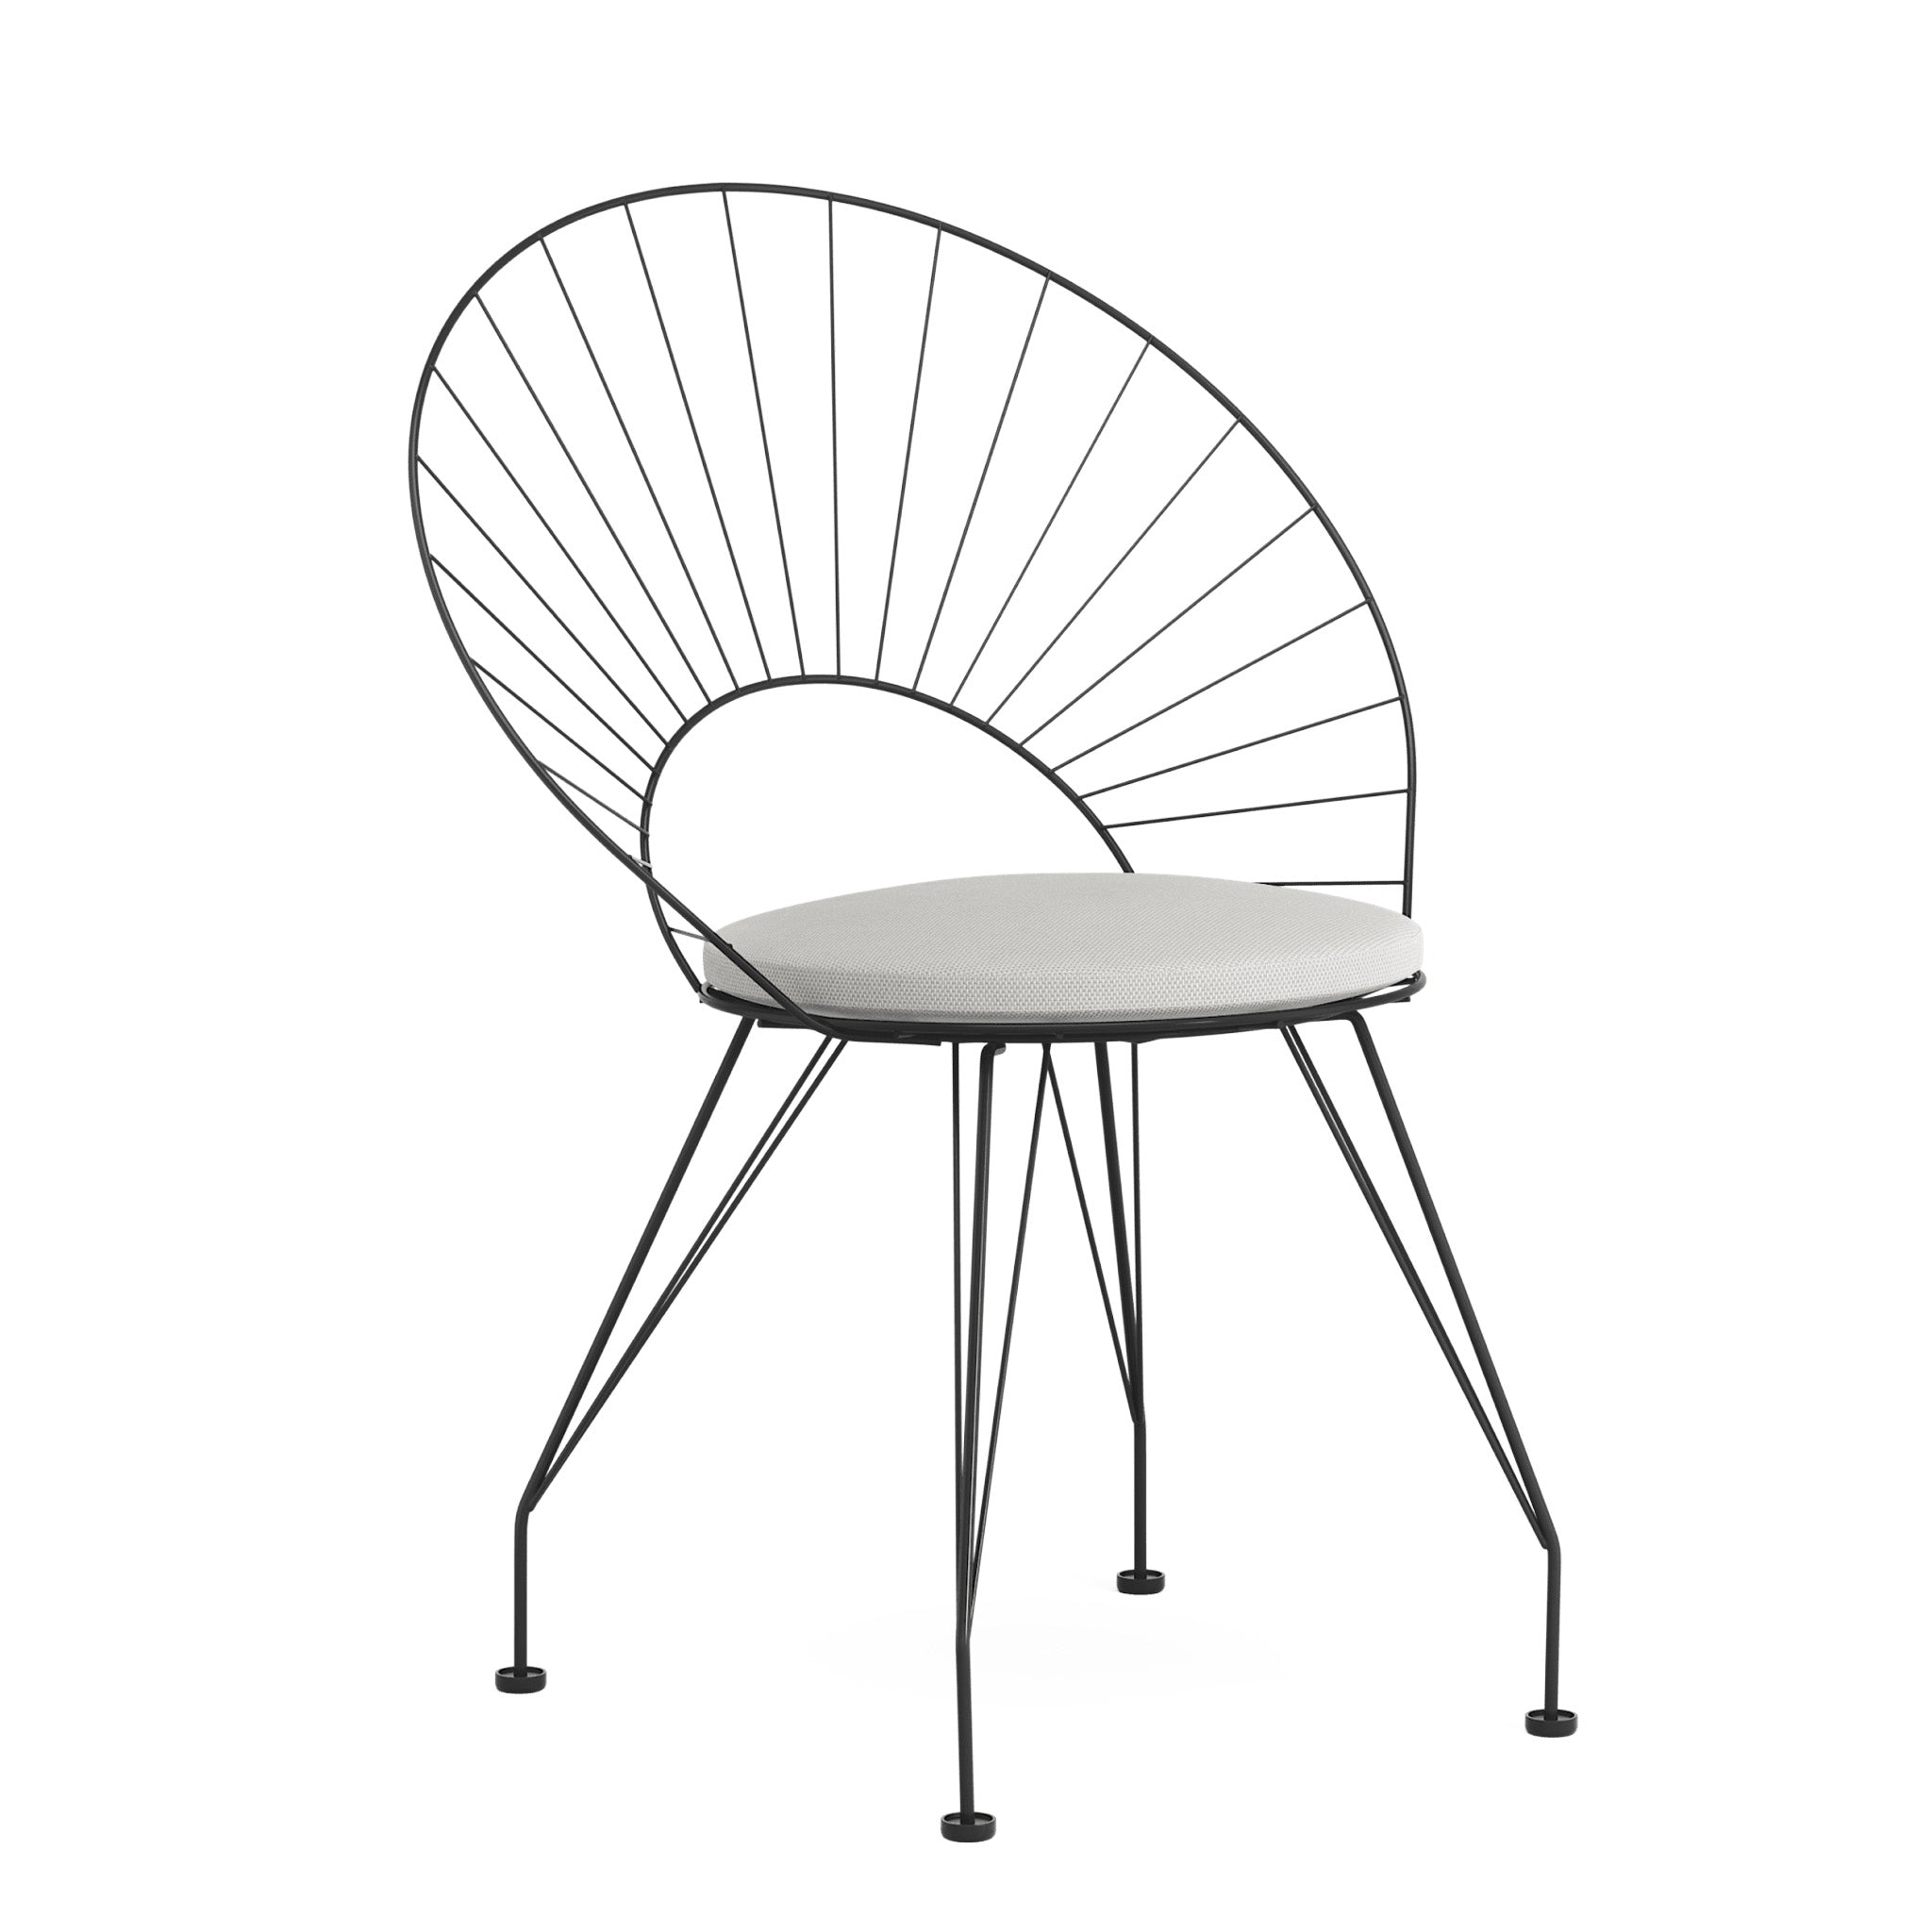 Desirée Chair by Swedese